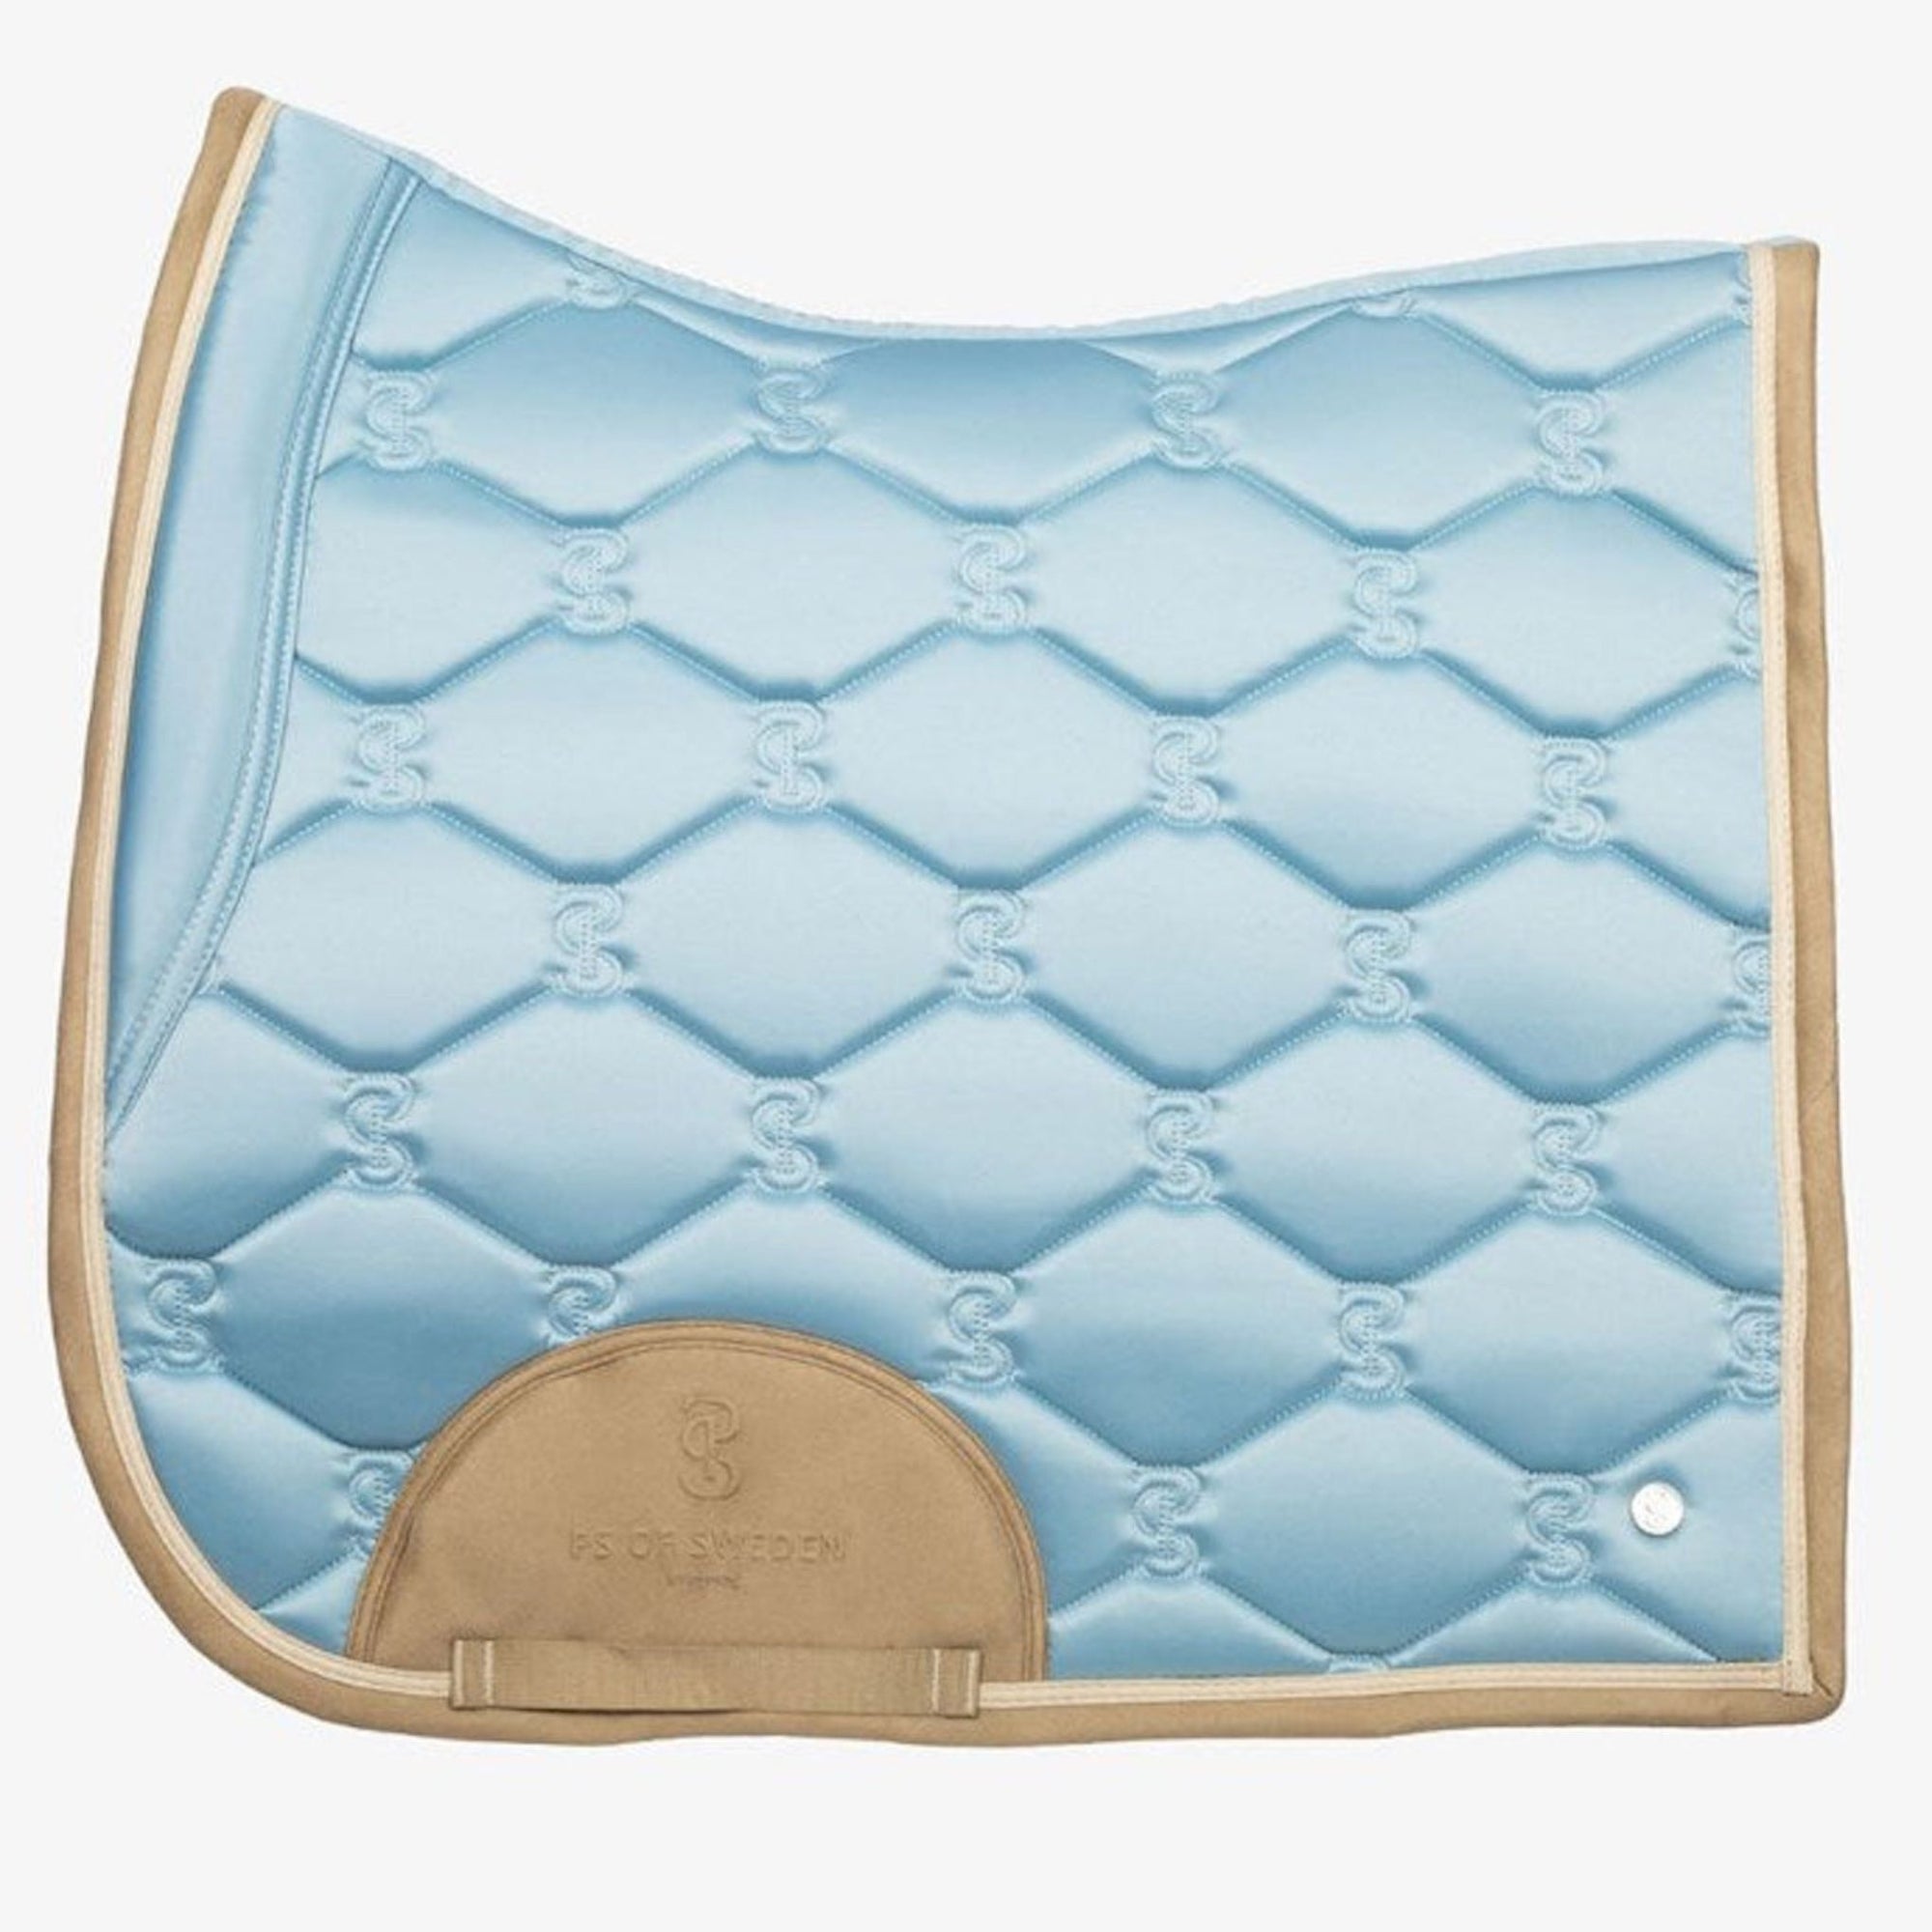 front view of psos stone blue dressage saddle pad.